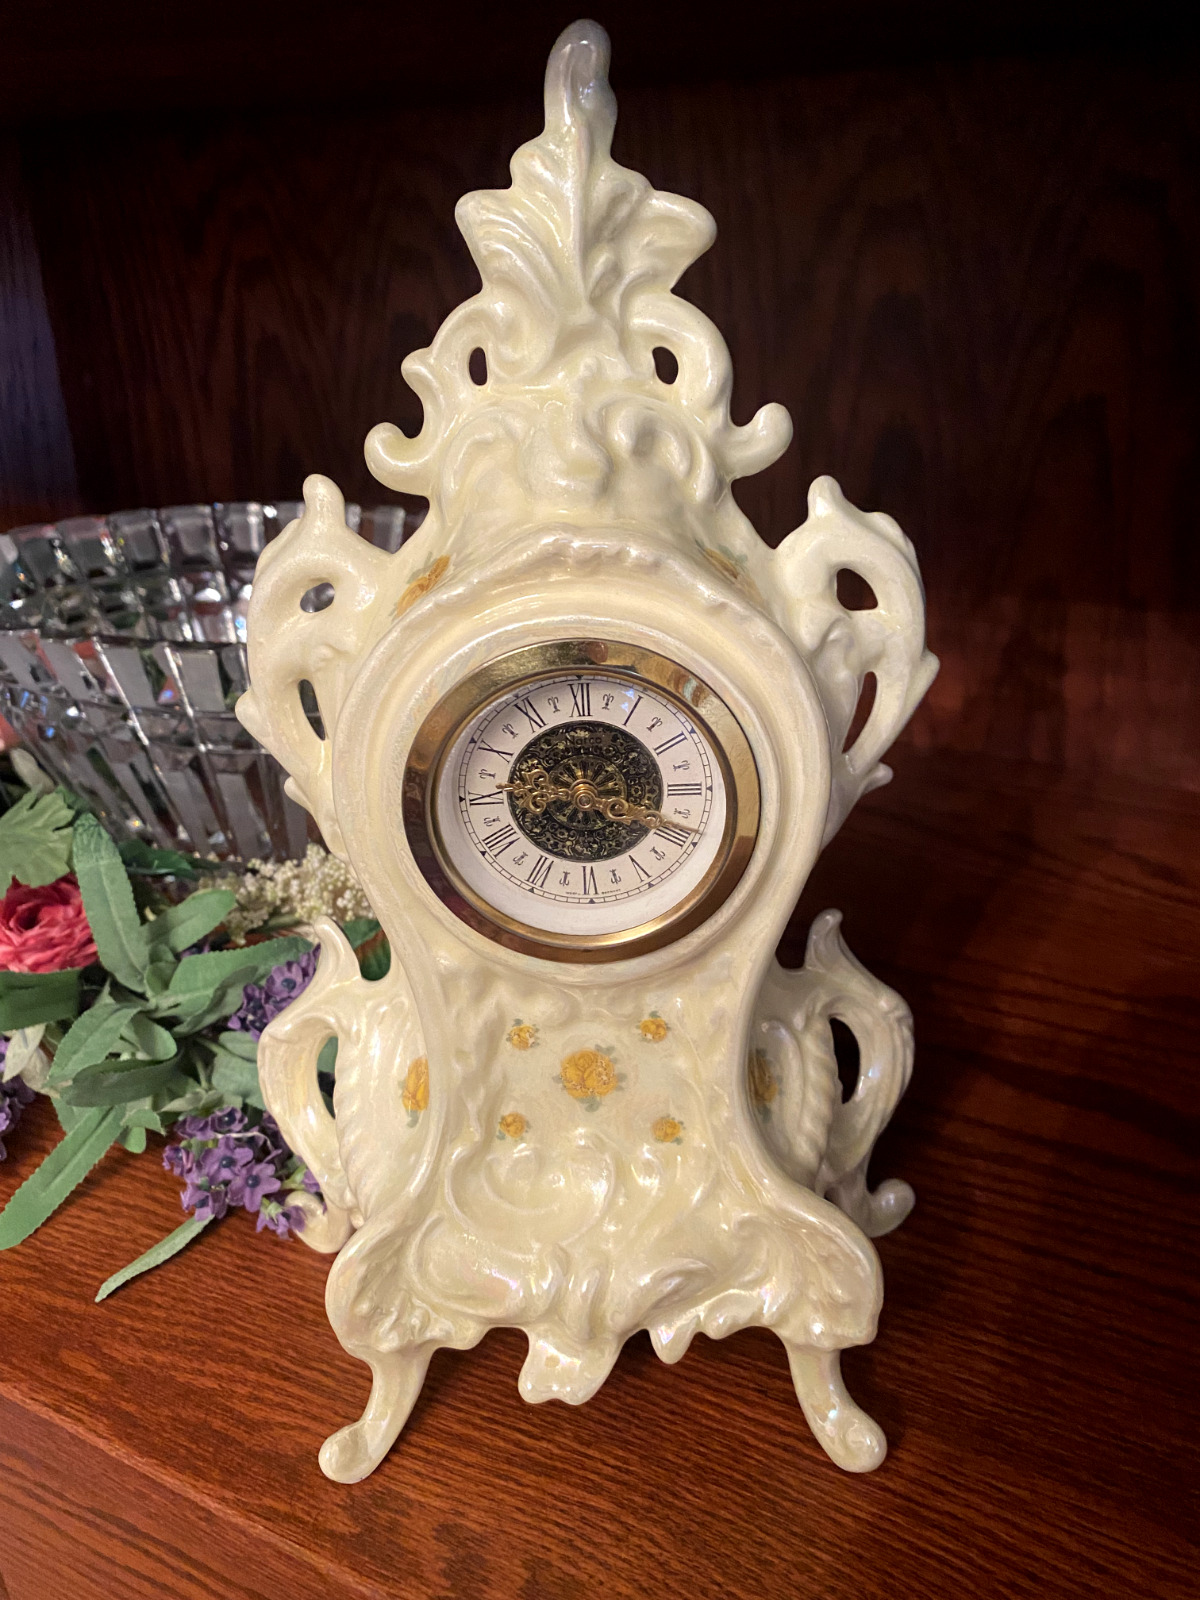 Vintage Narco  West Germany Porcelain Clock - Tested & Working +FAST SHIPPING